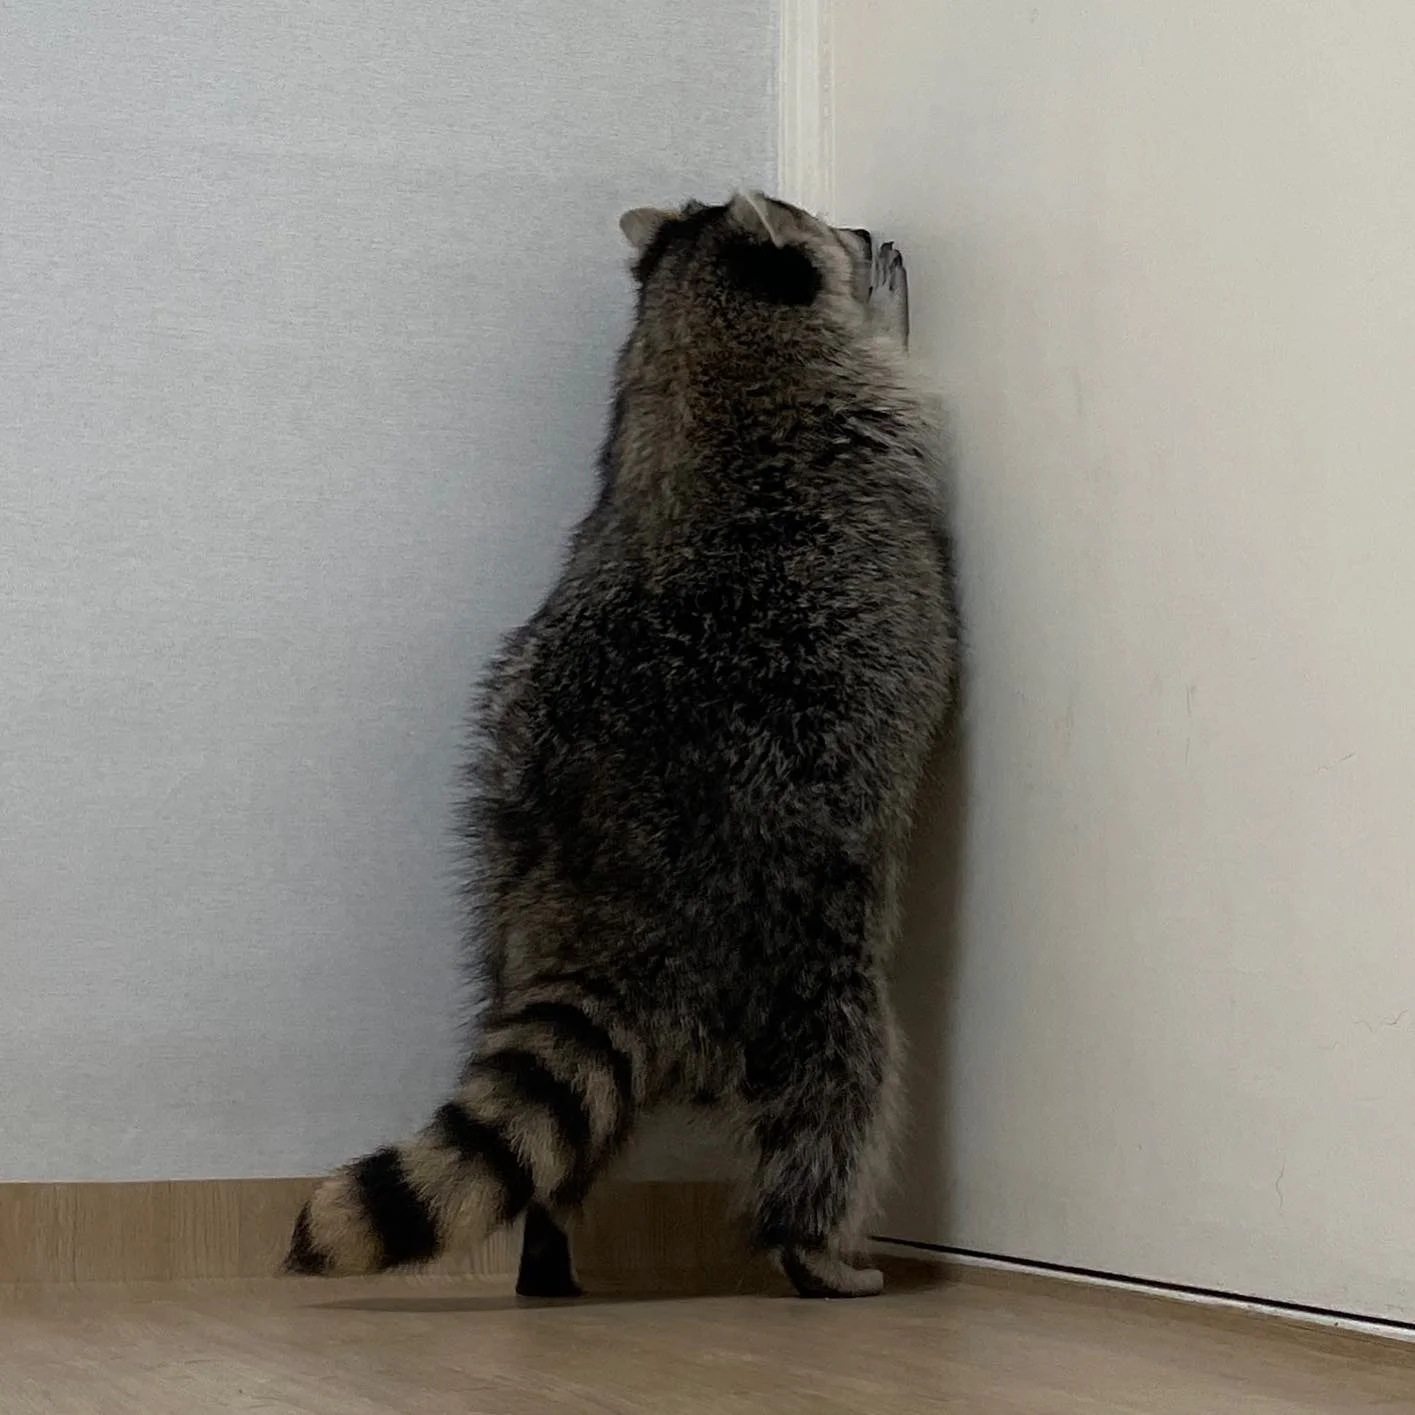 Raccoon inspecting the corner of a room.